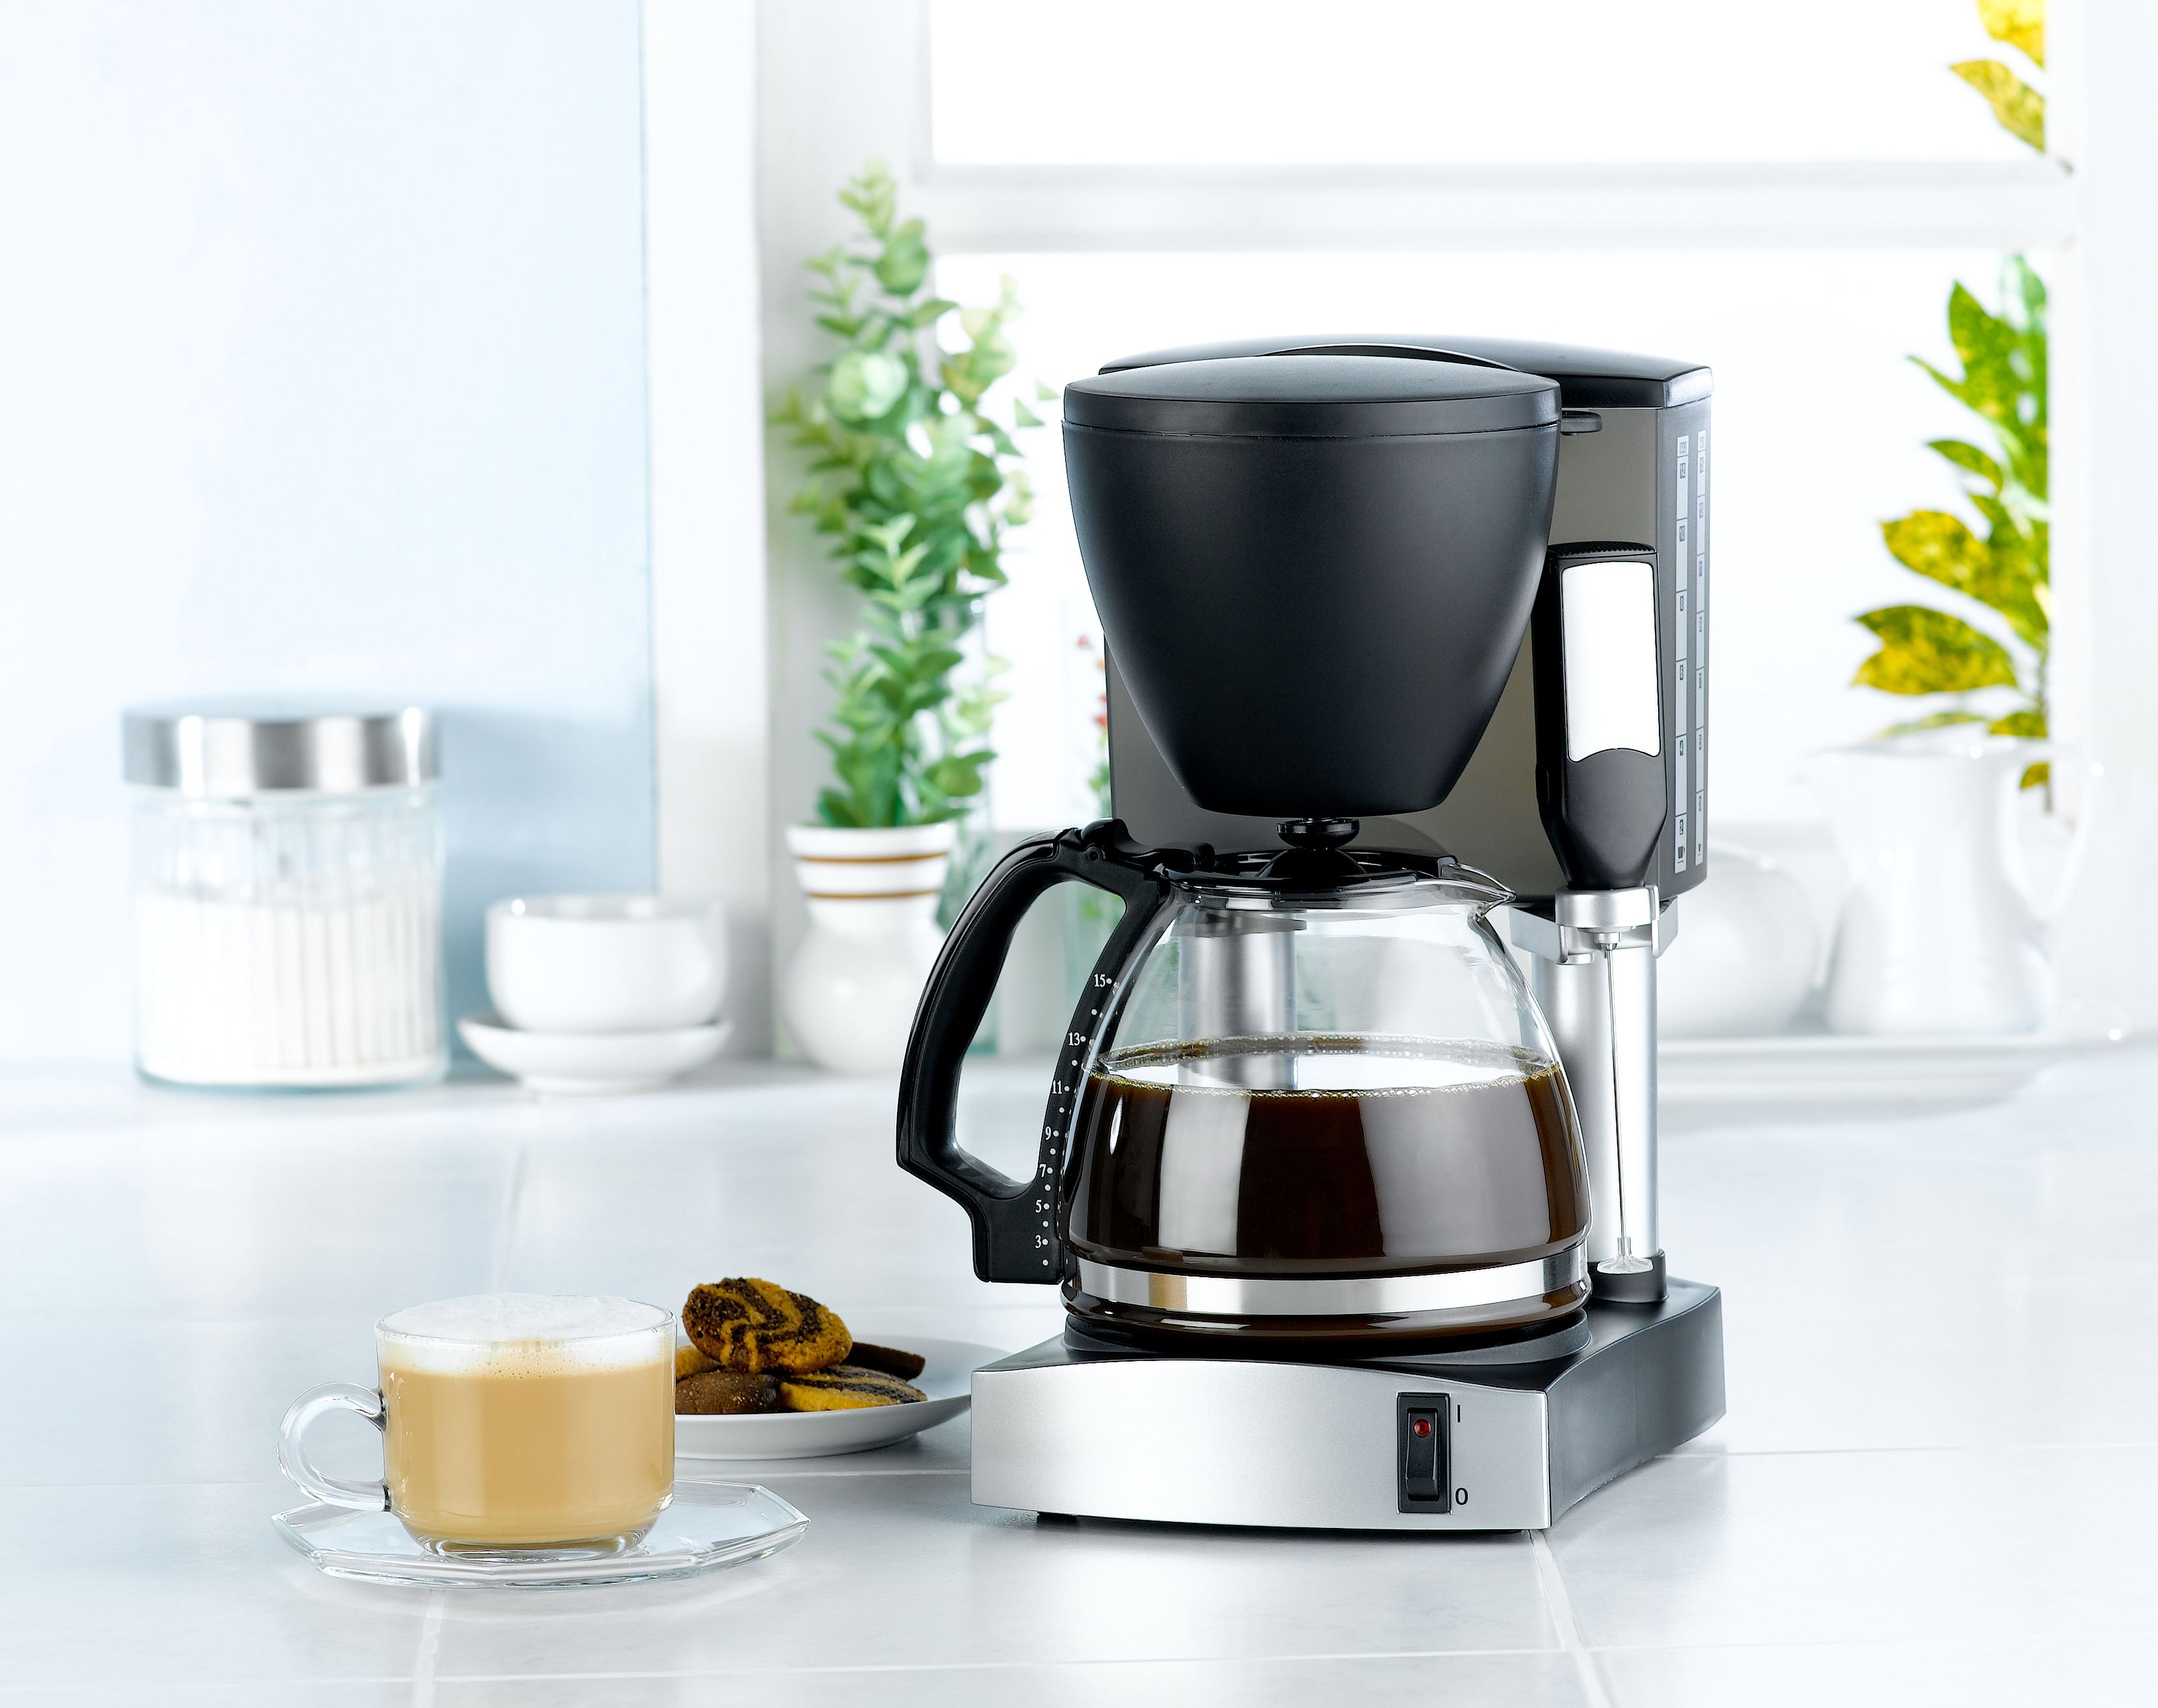 How to Clean a Coffee Maker - Tips for Cleaning Coffeemakers with